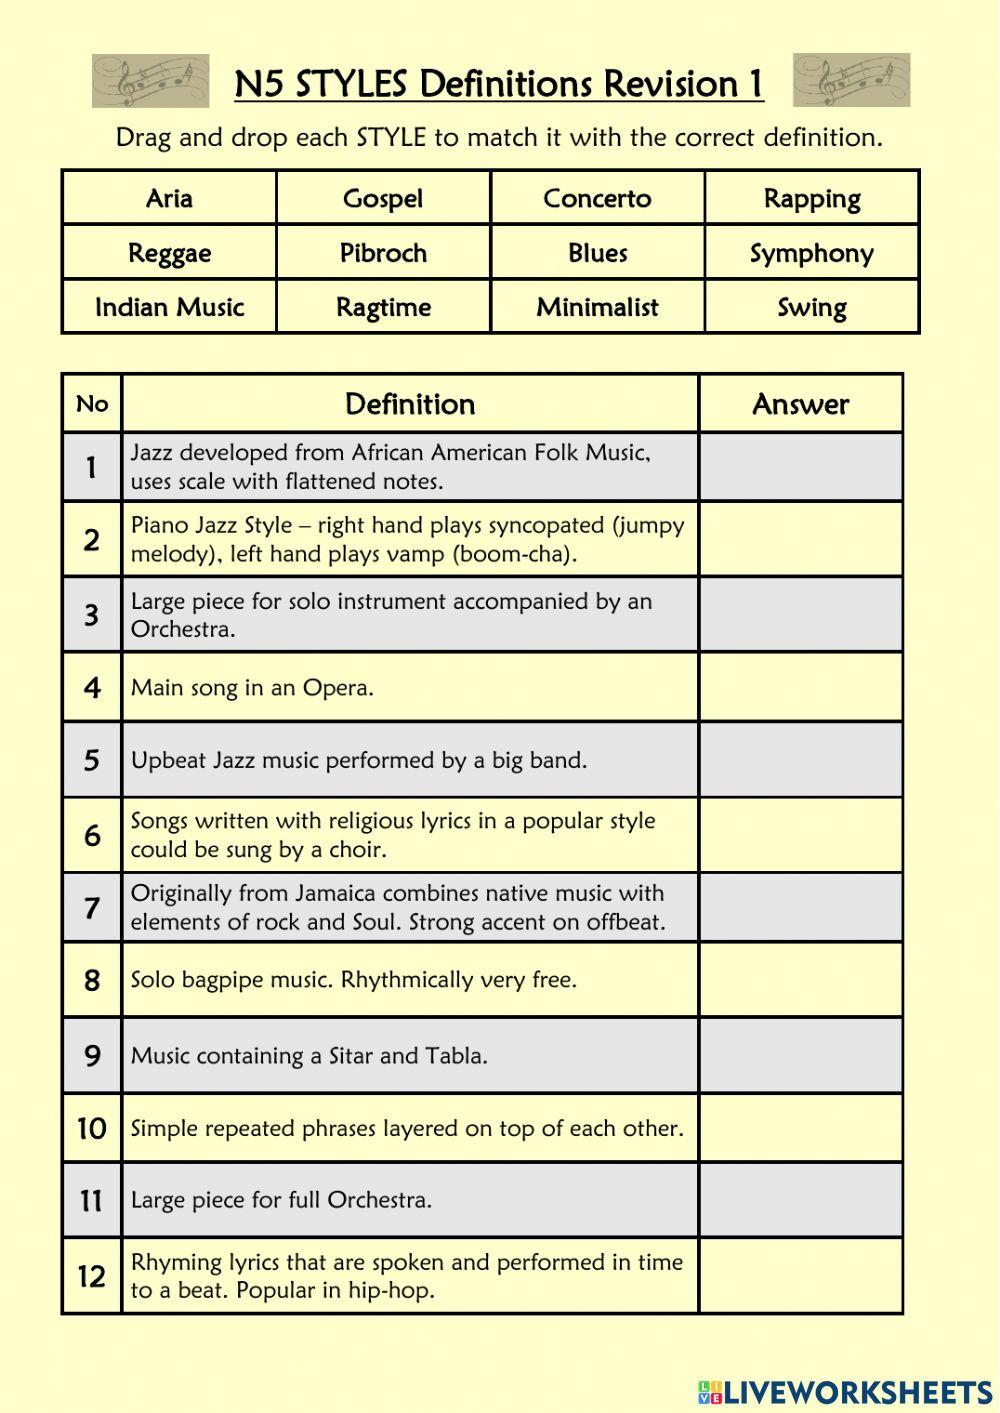 N5 Music - Styles Revision DEFINITIONS 1